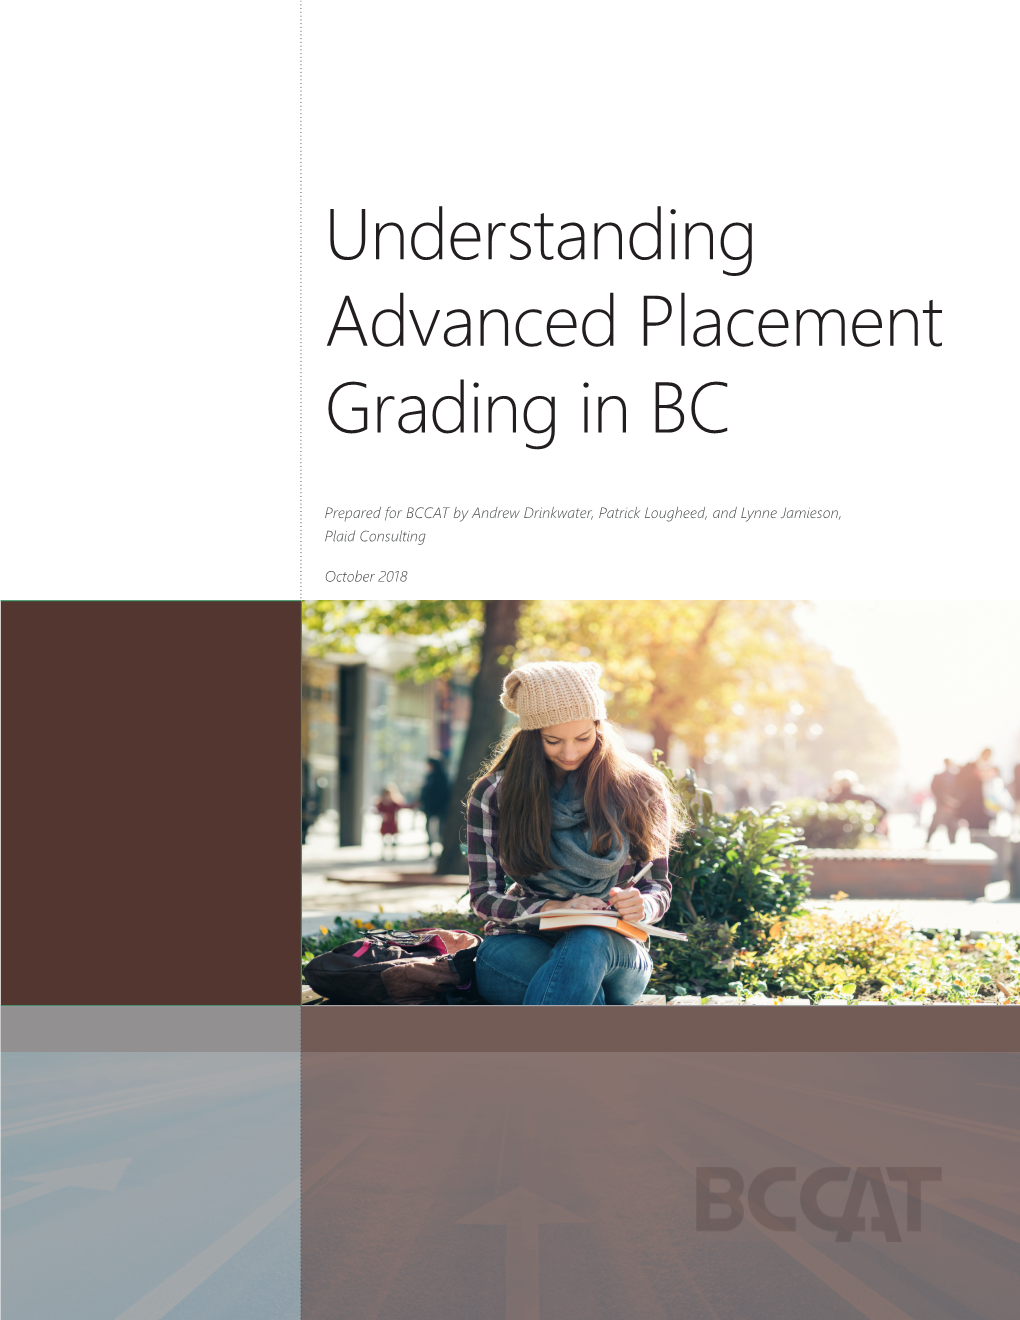 Understanding Advanced Placement Grading in BC